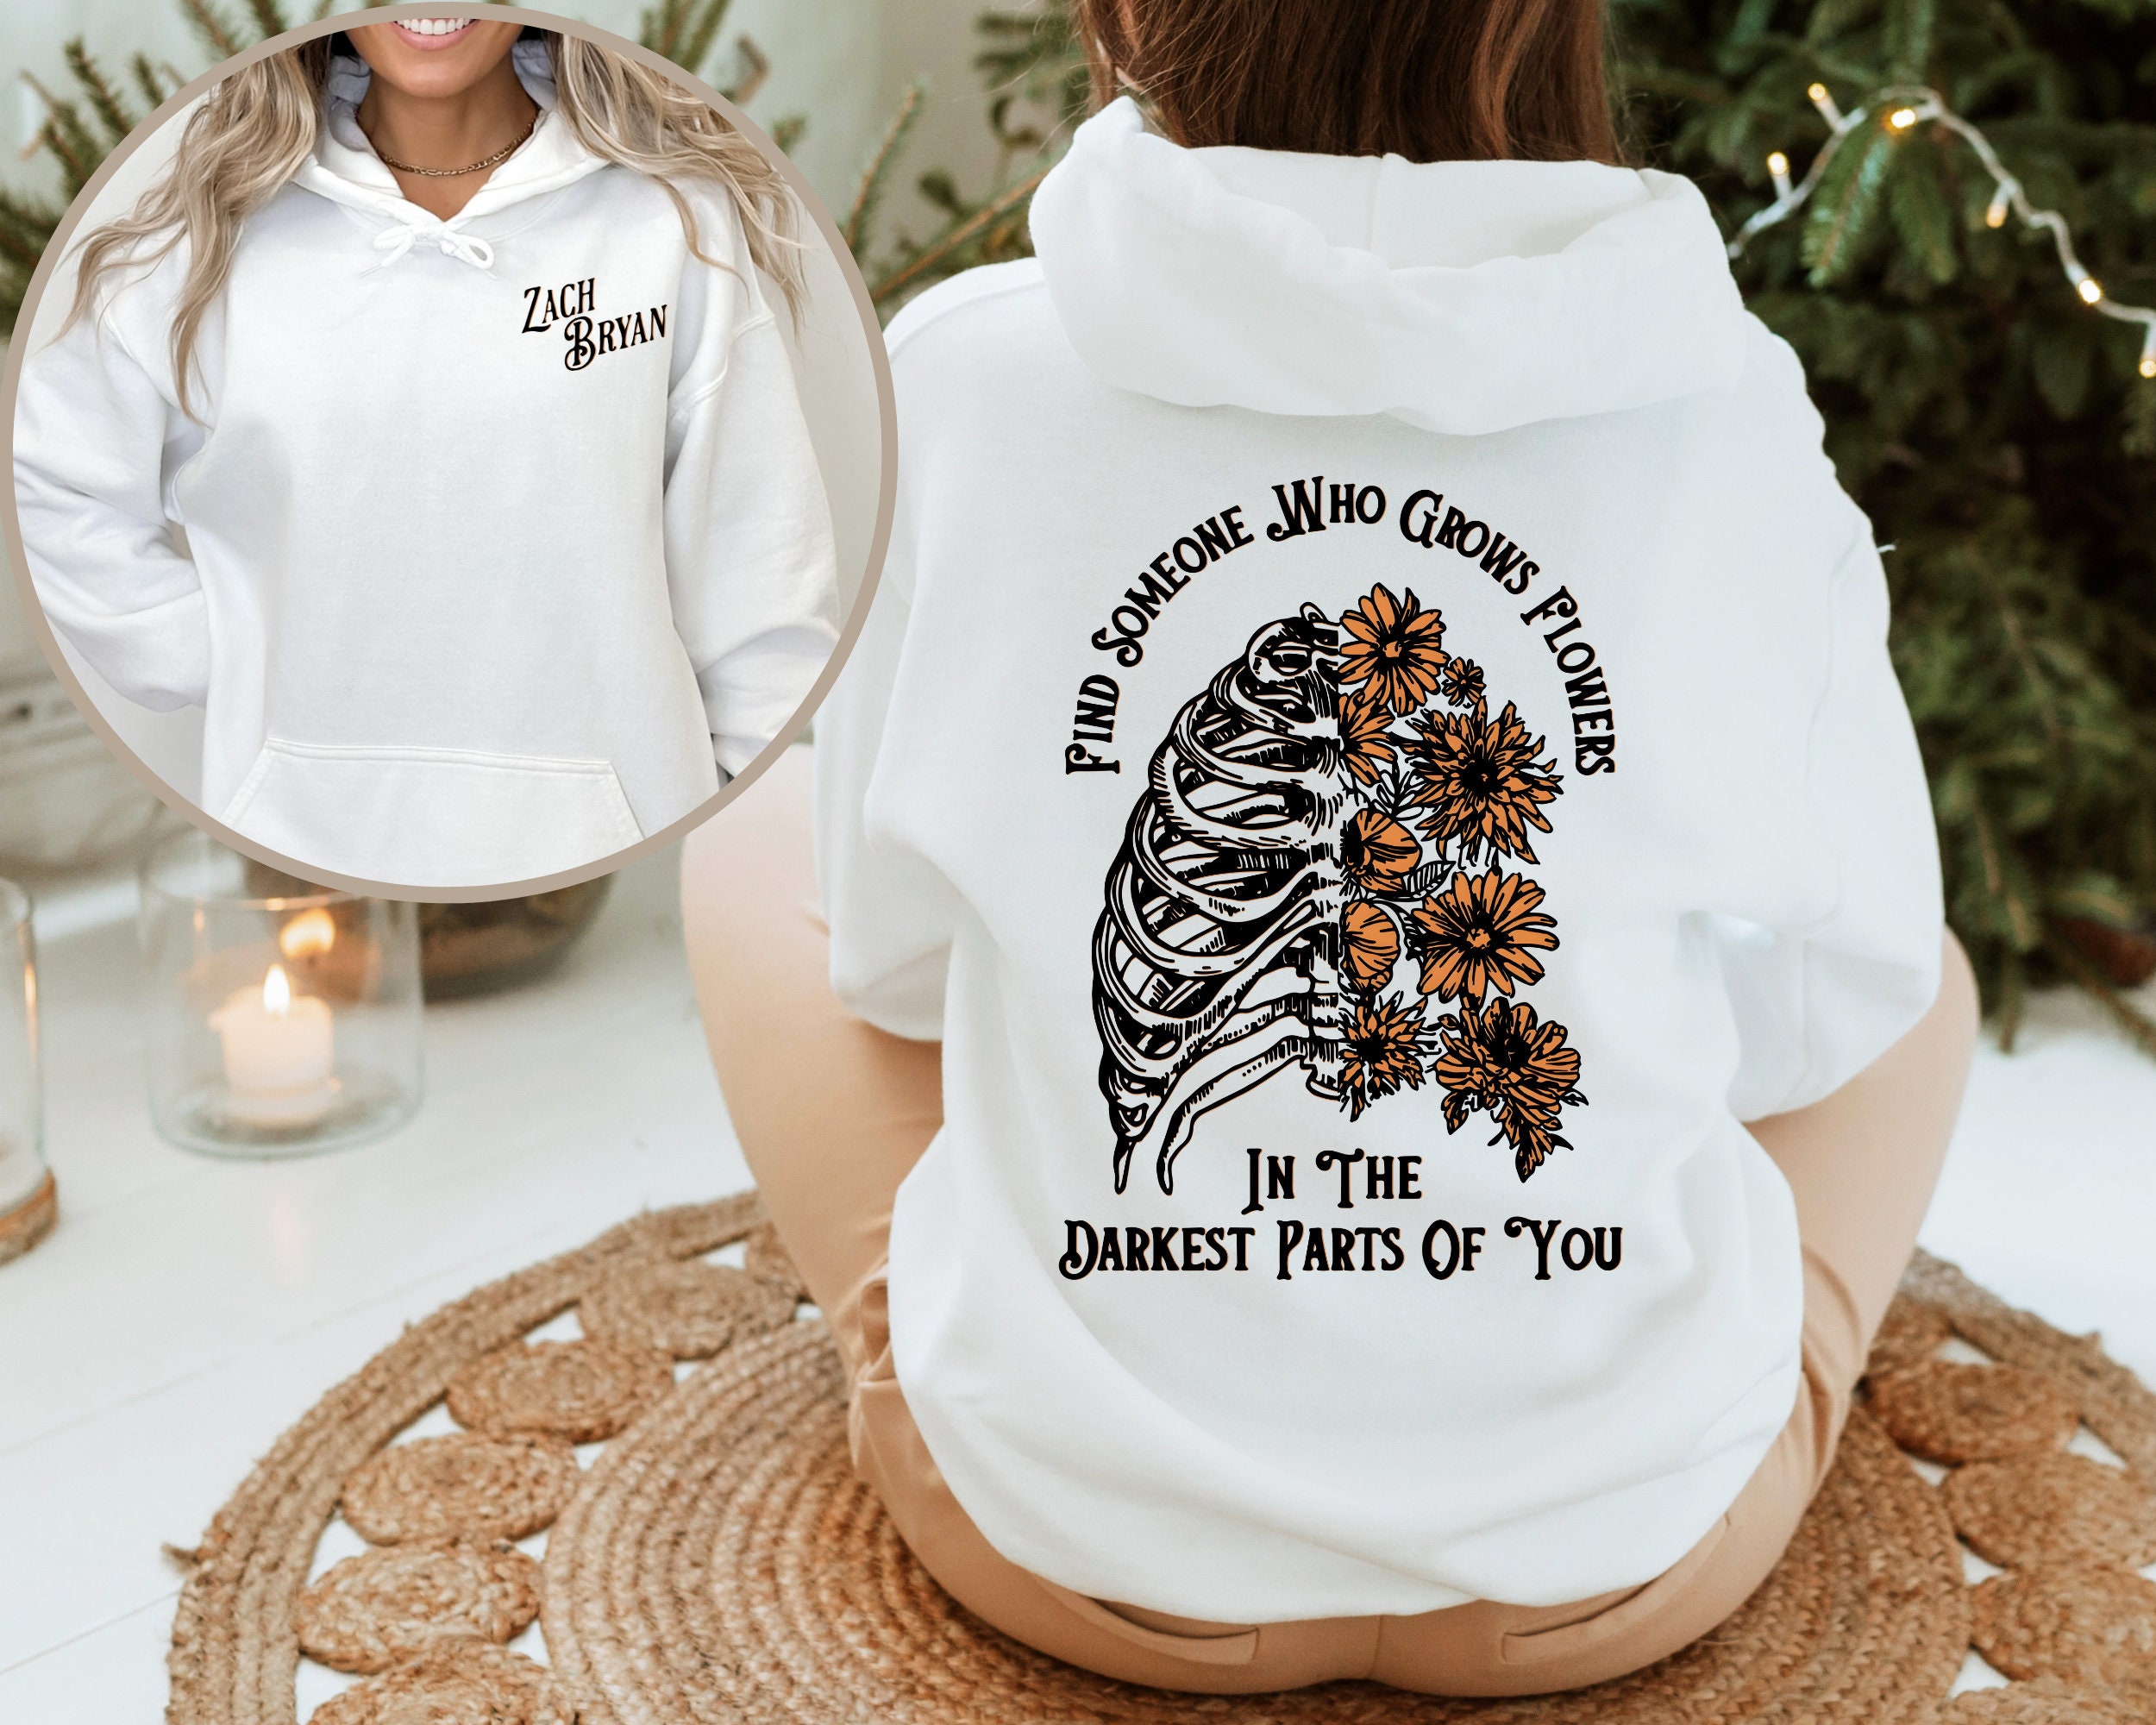 Zach Bryan Front and Back Printed Sweatshirt, Find Someone Who Grows Flowers